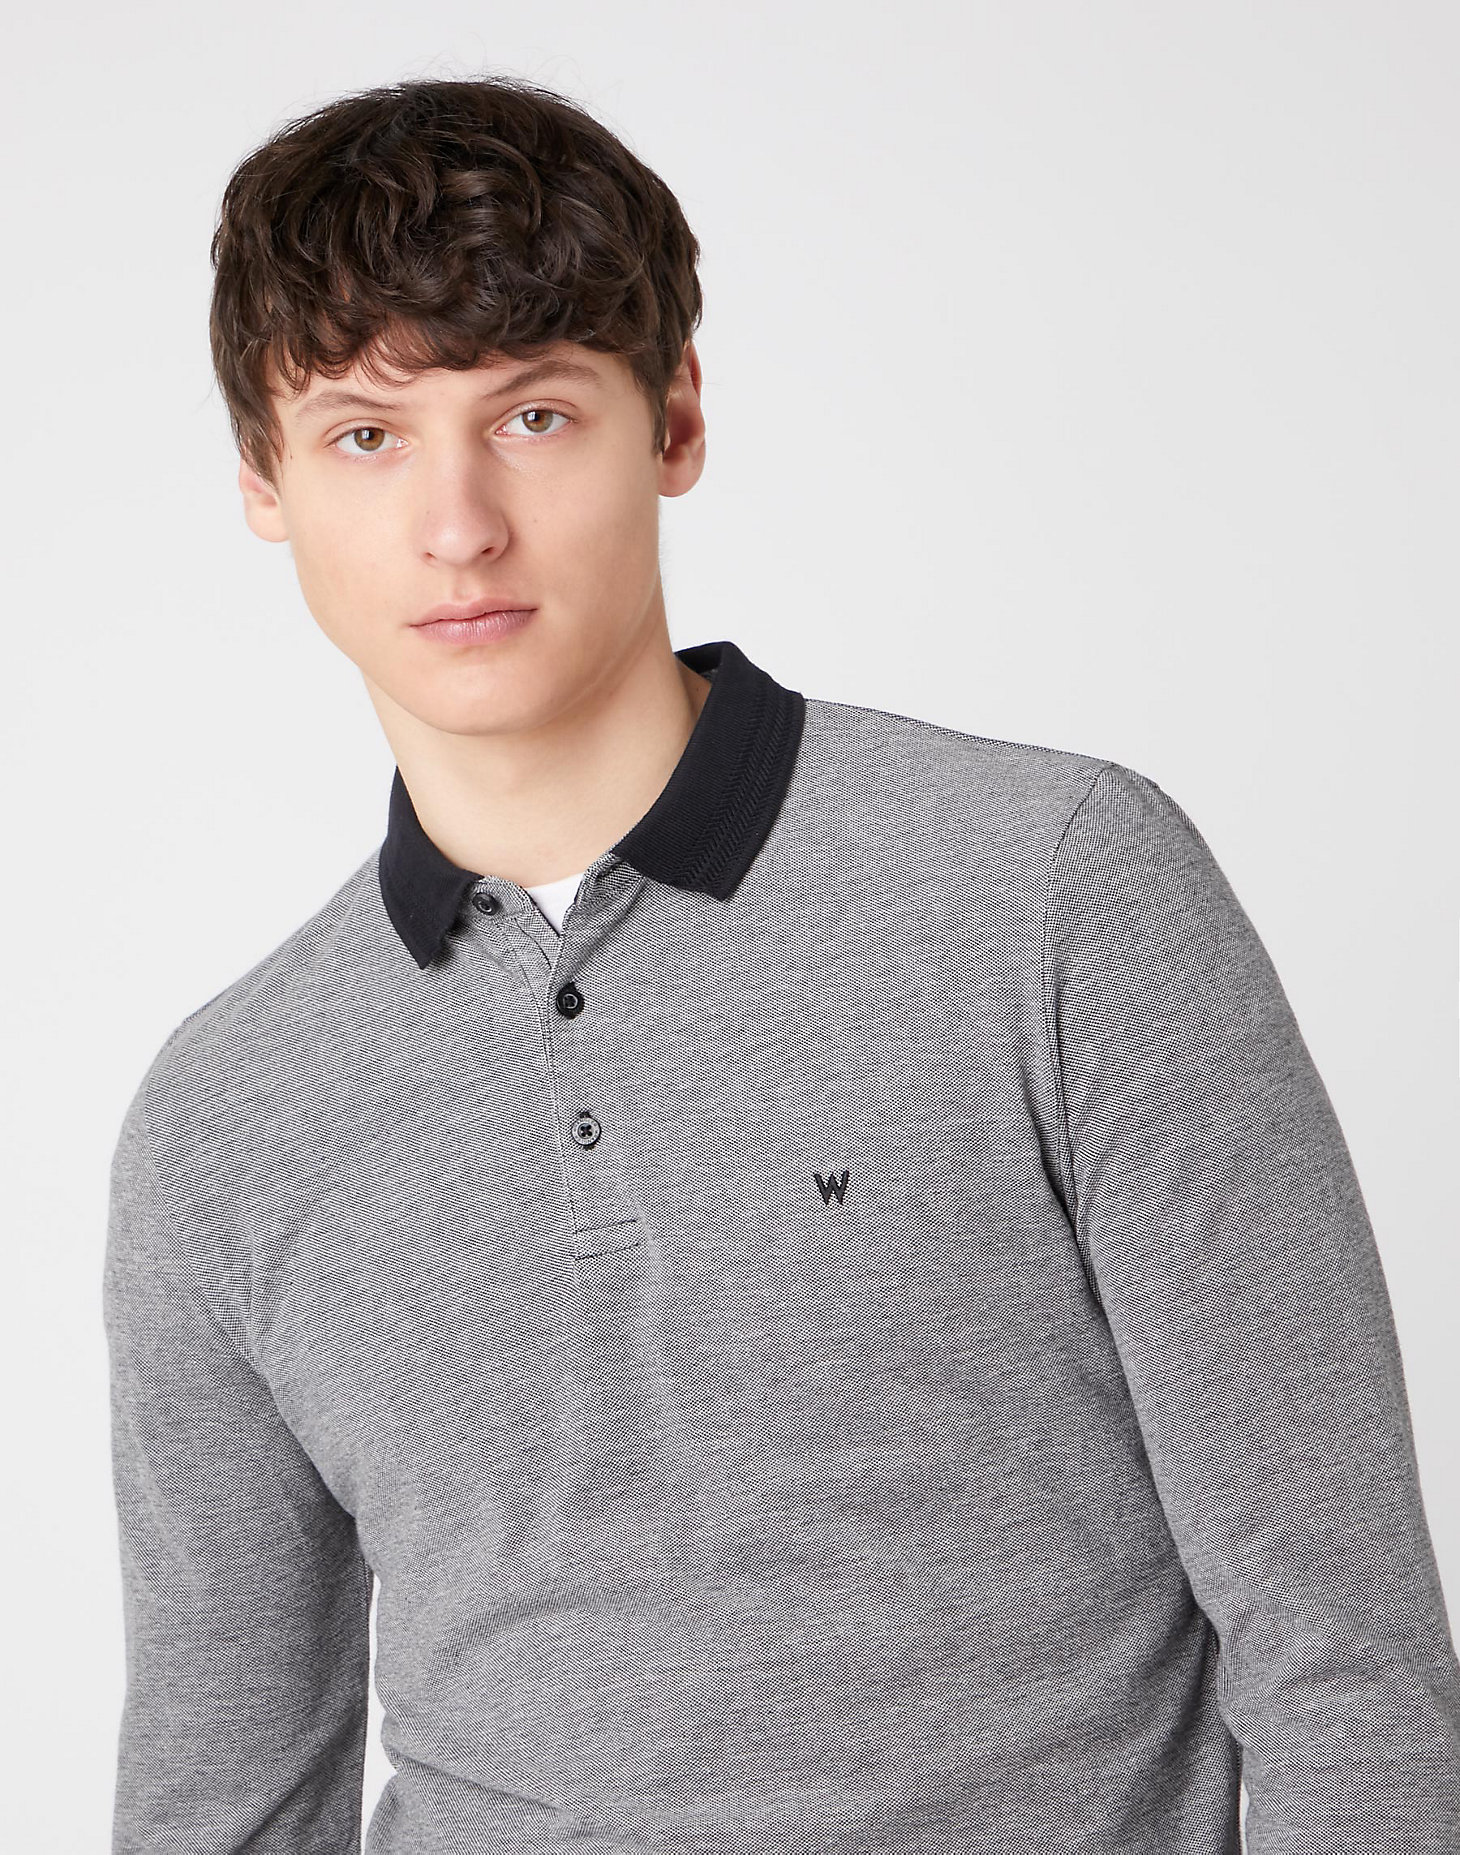 Long Sleeve Refined Polo in Black alternative view 3